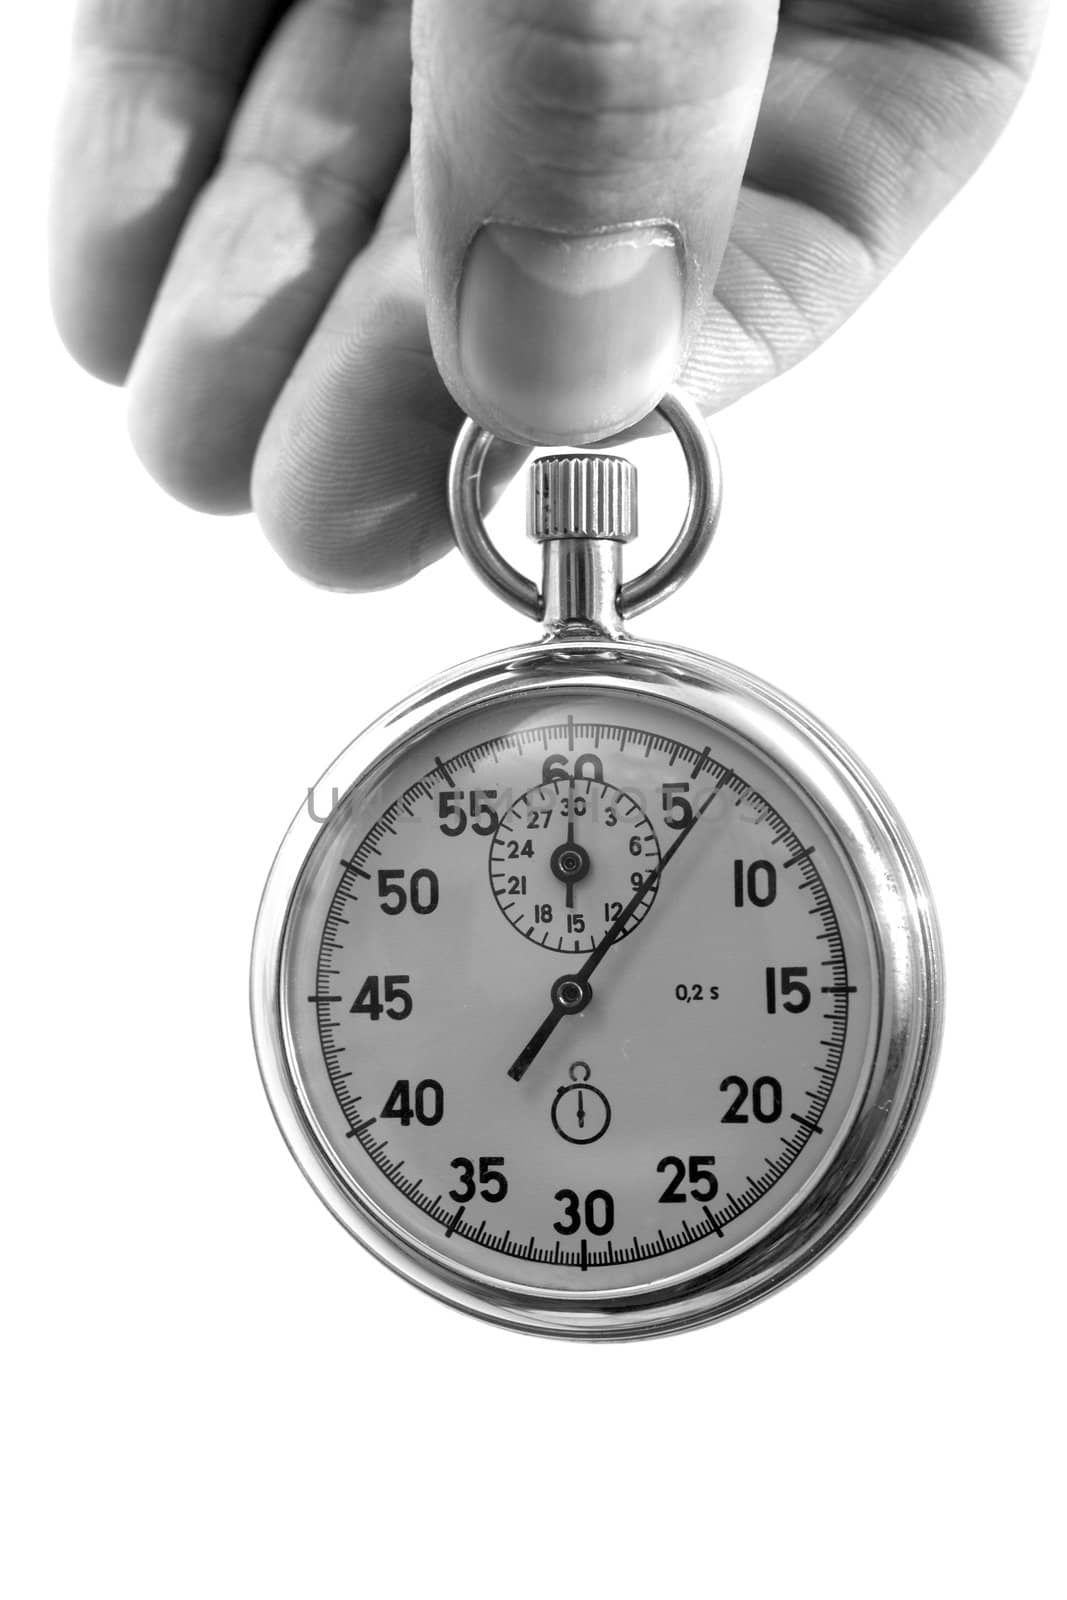 An image of a stopwatch in hand